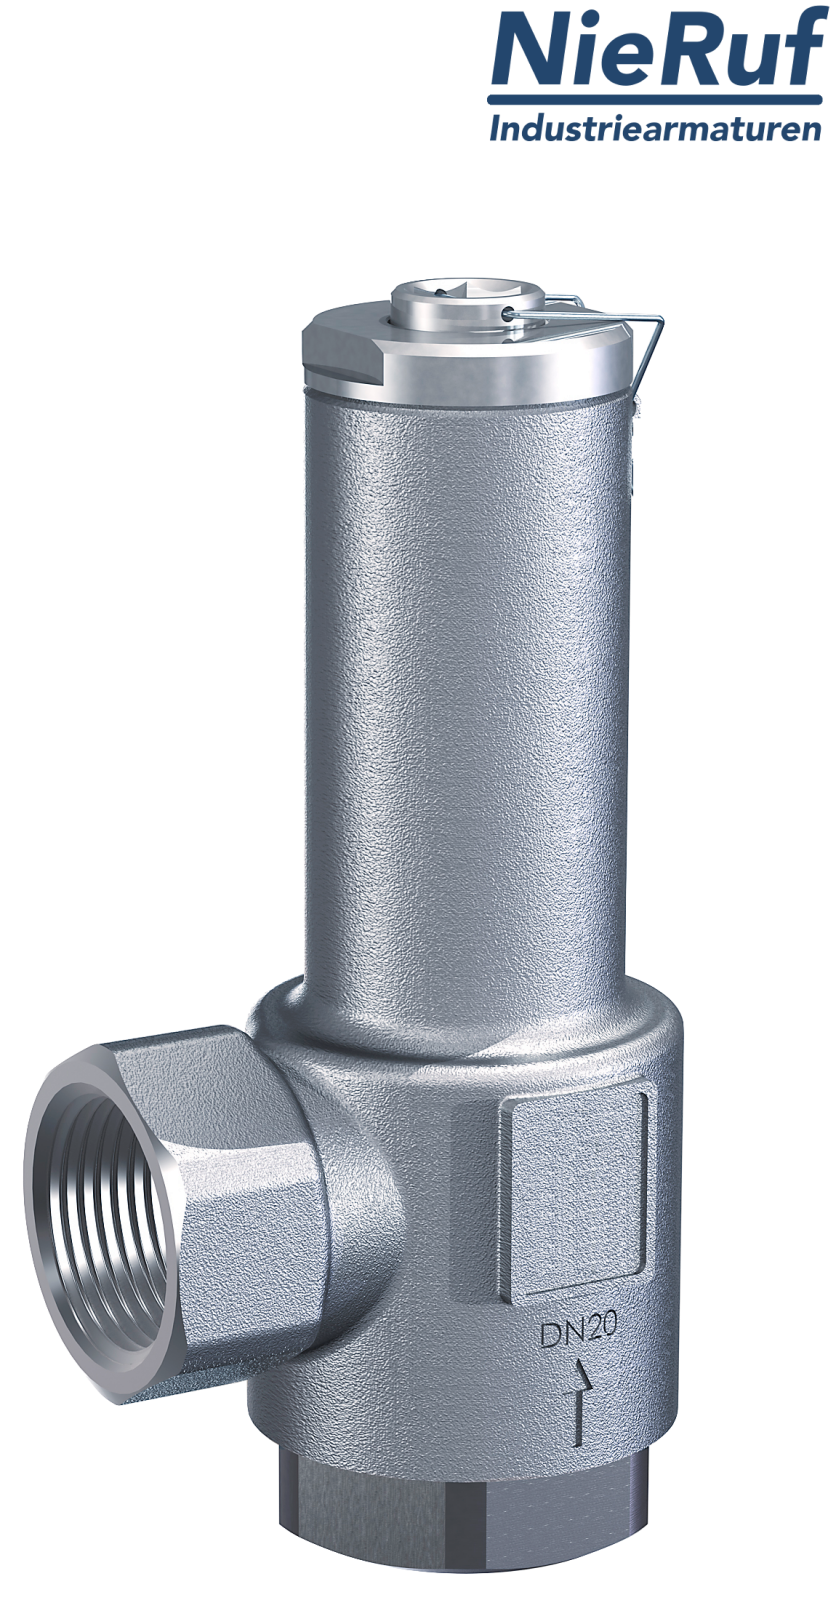 angle-type overflow valve 1" inch fm UV03 stainless steel AISI 316L 0,5 - 2,5 bar